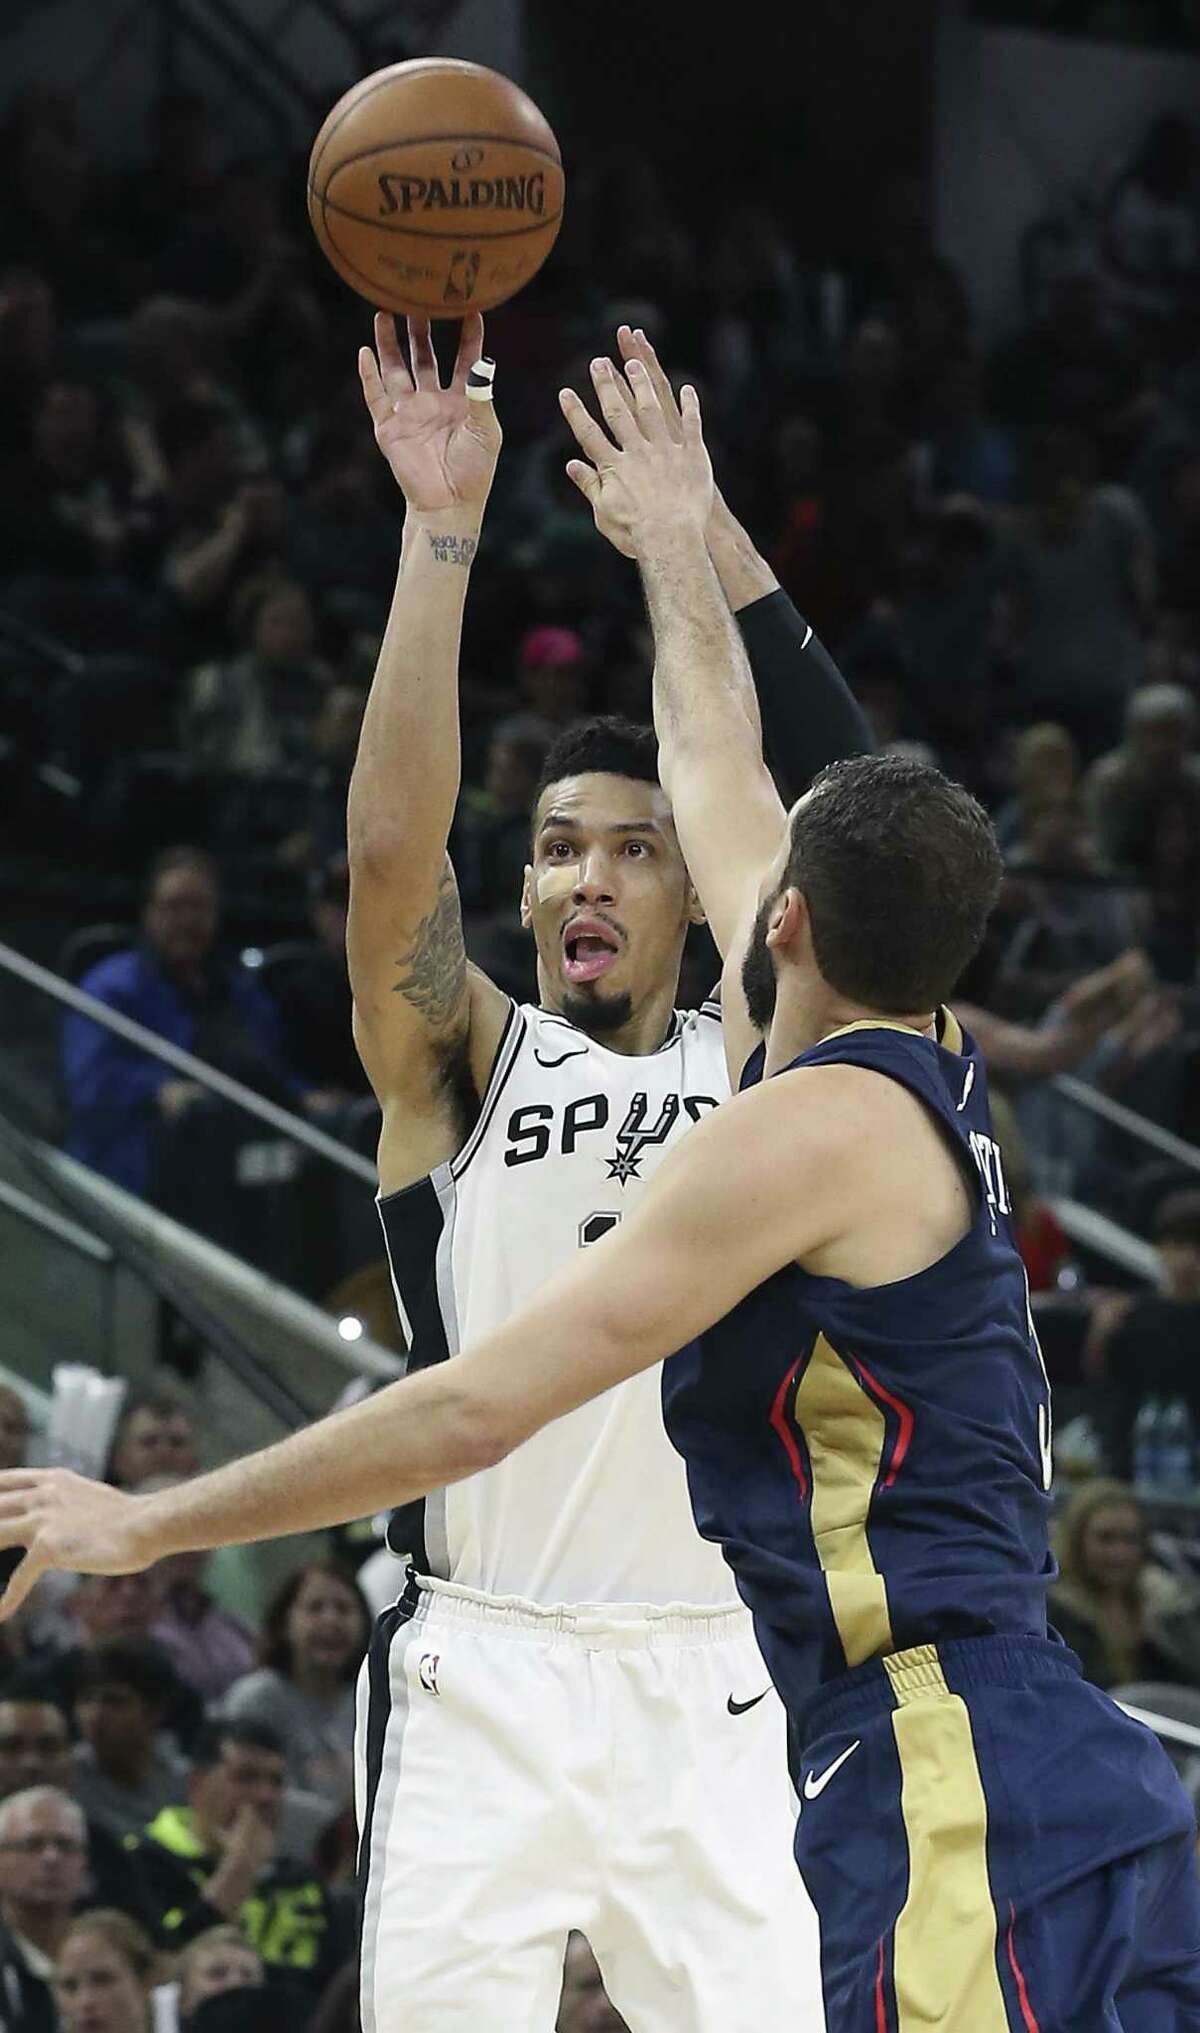 DANNY GREEN 959 made on 2,421 attempts; 39.6 percent